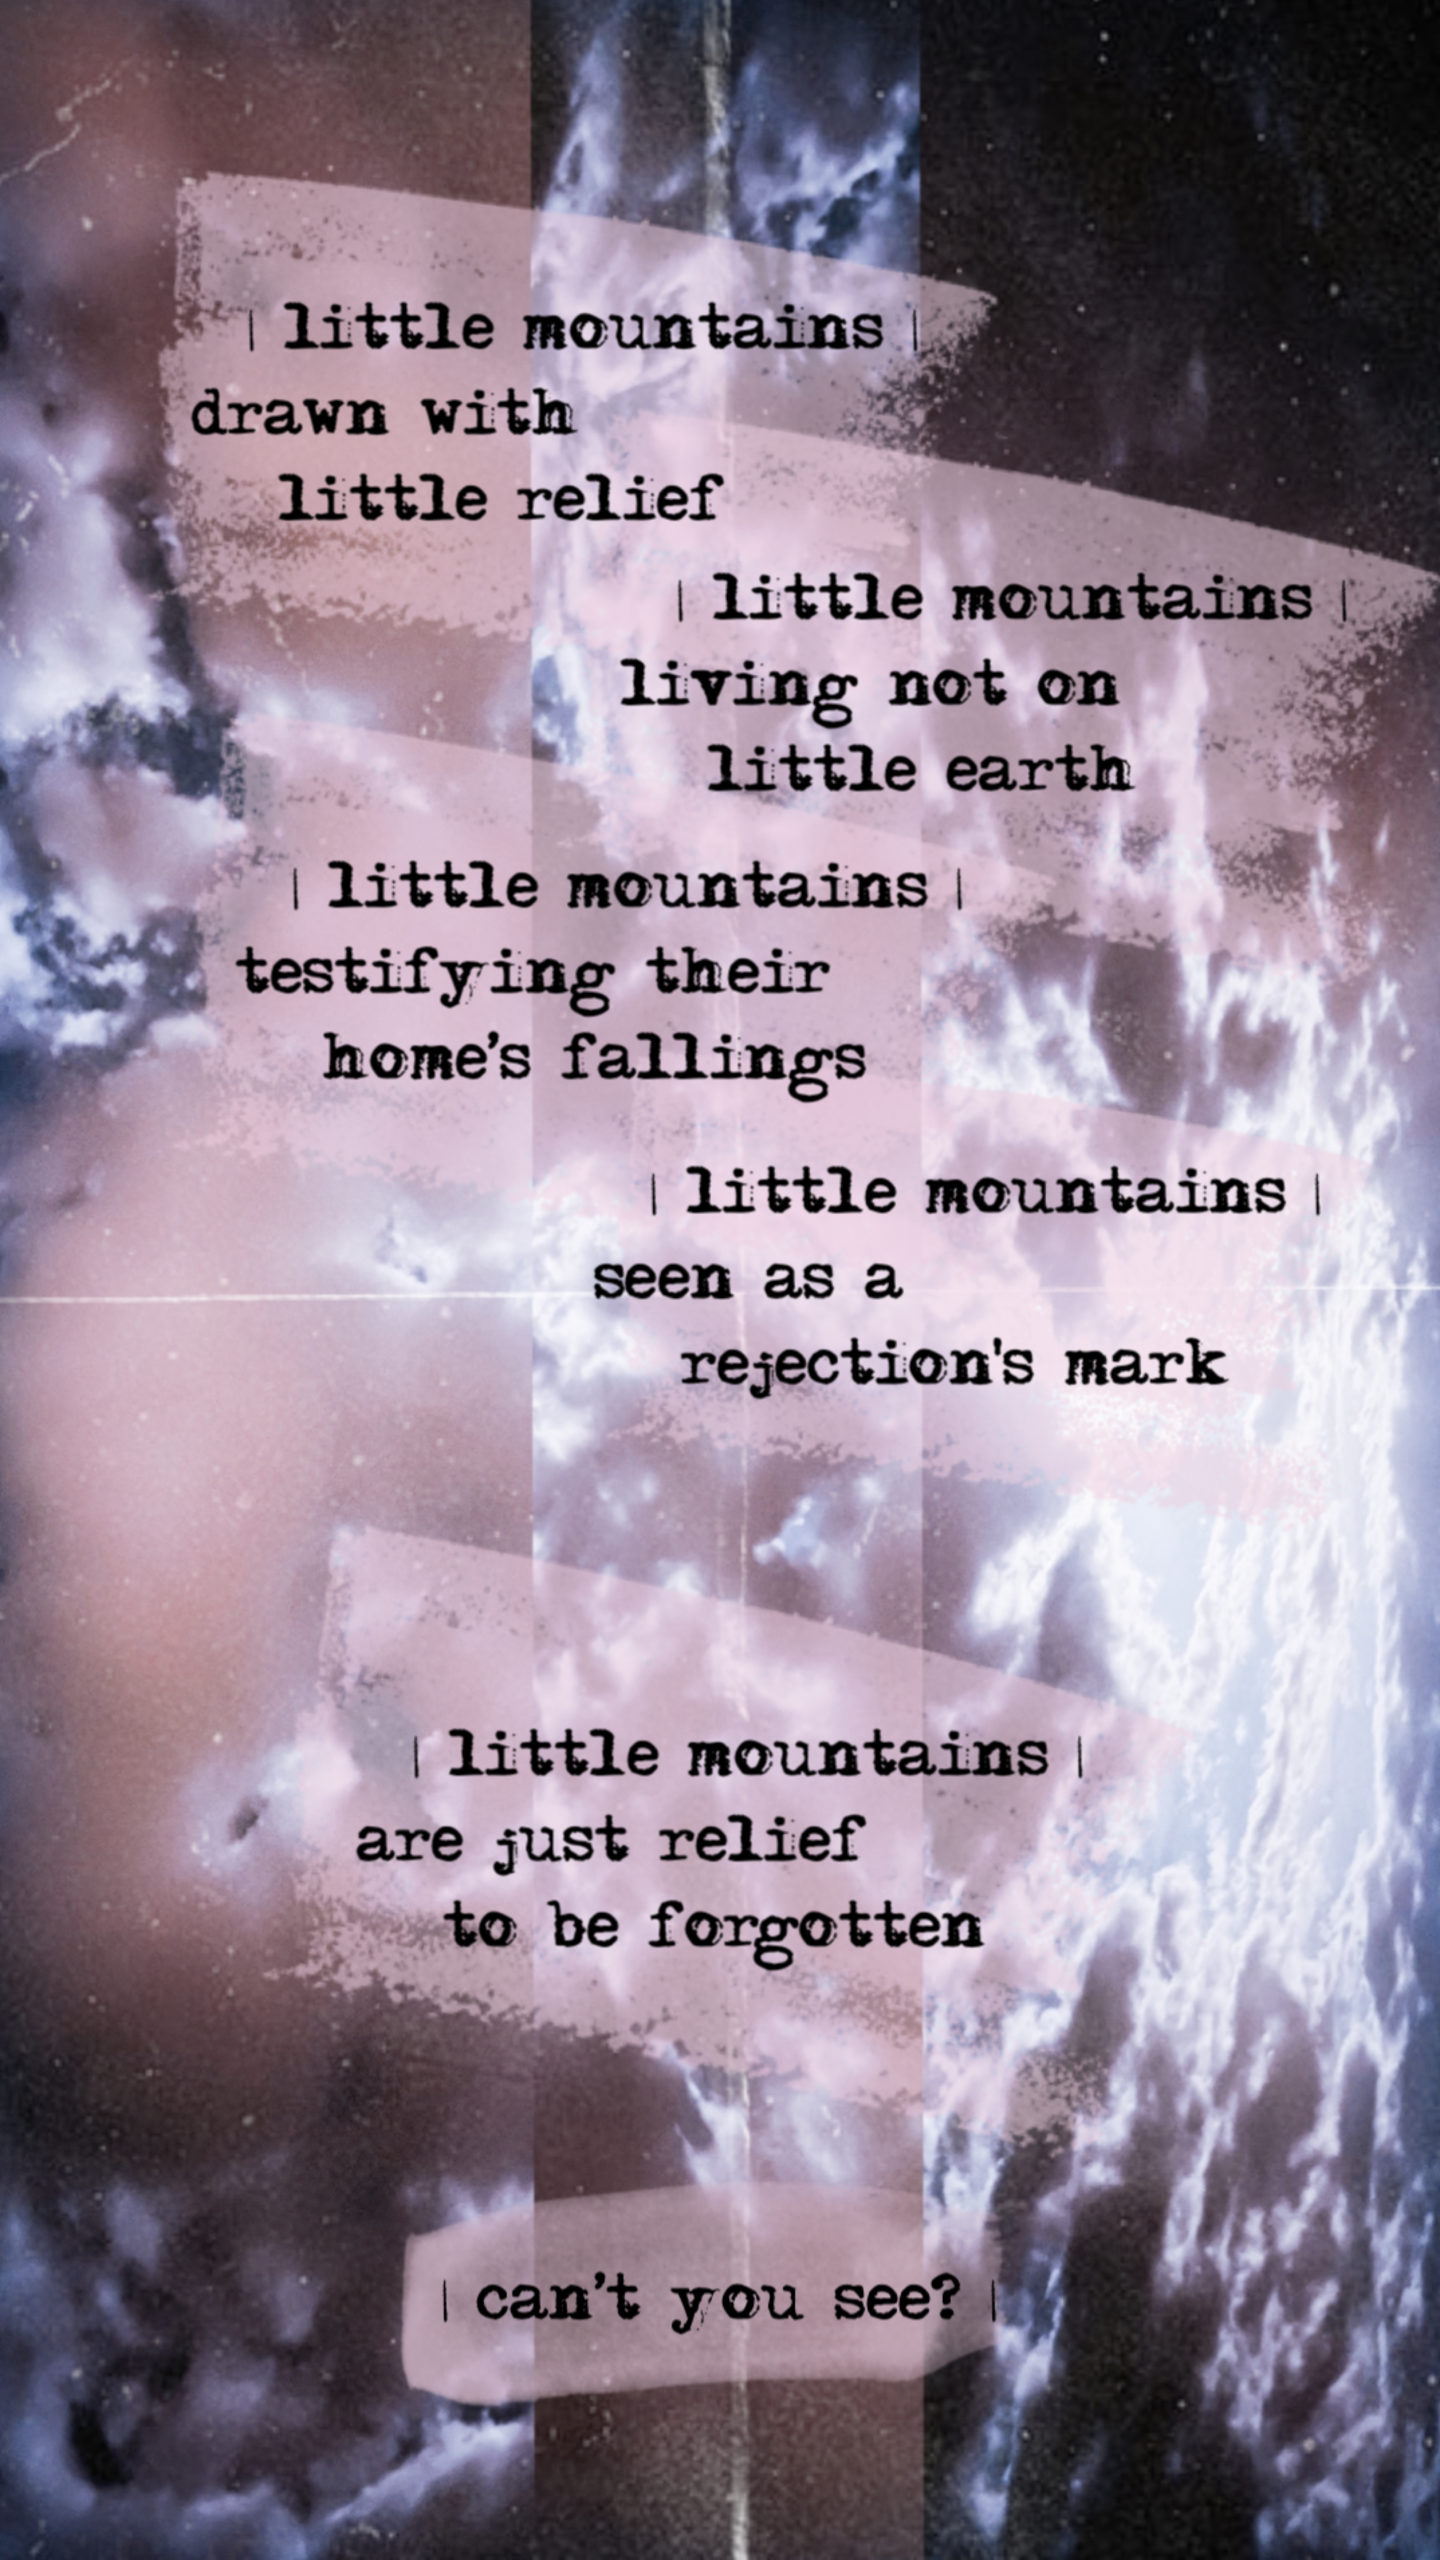 || little mountains ||</p>
<p>      | little mountains |<br />
drawn with<br />
little relief </p>
<p>      | little mountains |<br />
living not on<br />
little earth </p>
<p>      | little mountains |<br />
testifying their<br />
home’s fallings</p>
<p>      | little mountains |<br />
seen as a<br />
rejection's mark</p>
<p>      | little mountains |<br />
are just relief<br />
to be forgotten</p>
<p>      | can’t you see? |